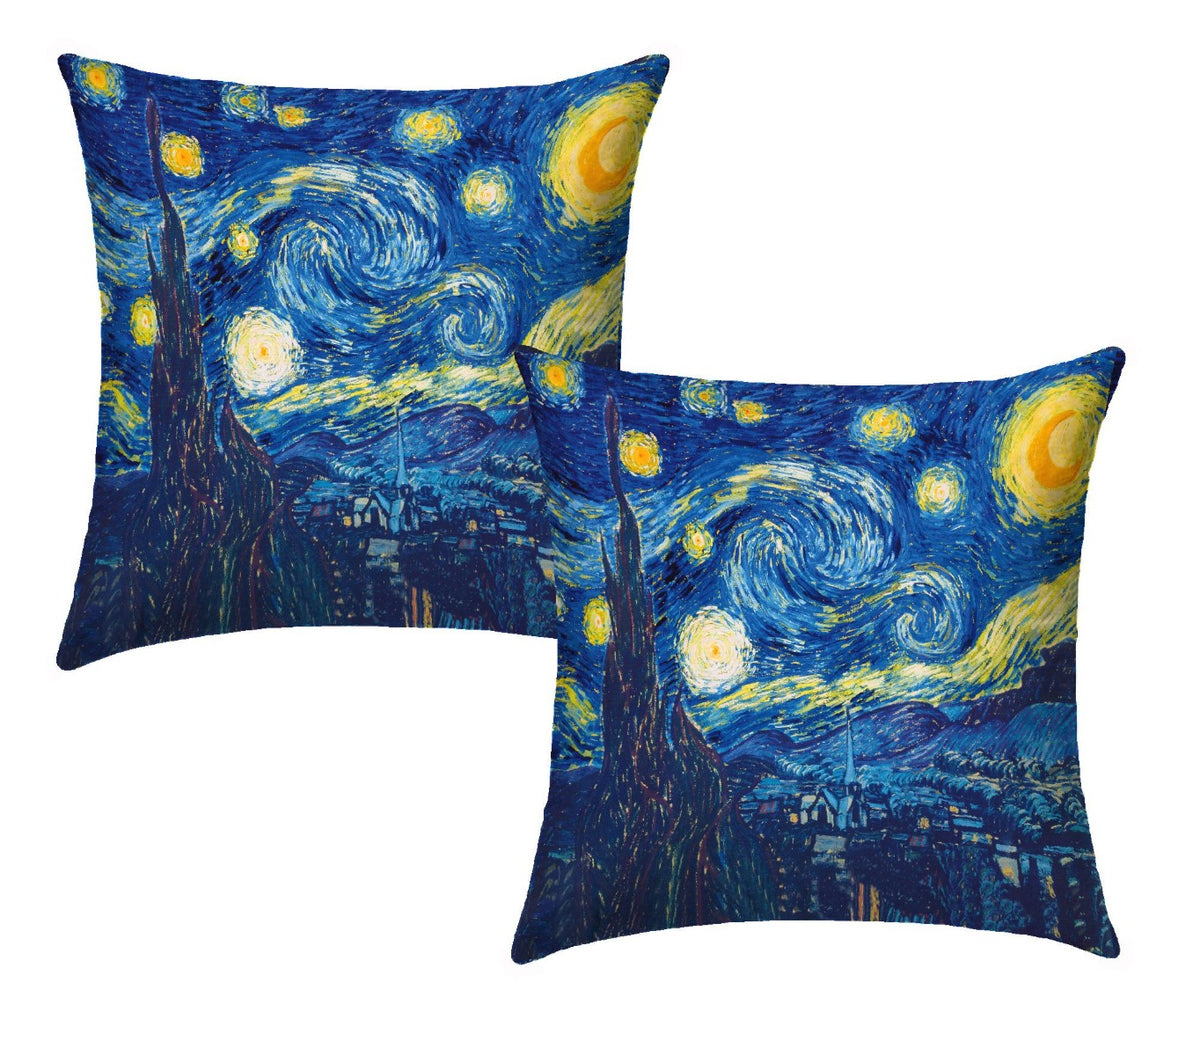 Pair of Cushion Covers for Furniture - Van Gogh-Starry Night